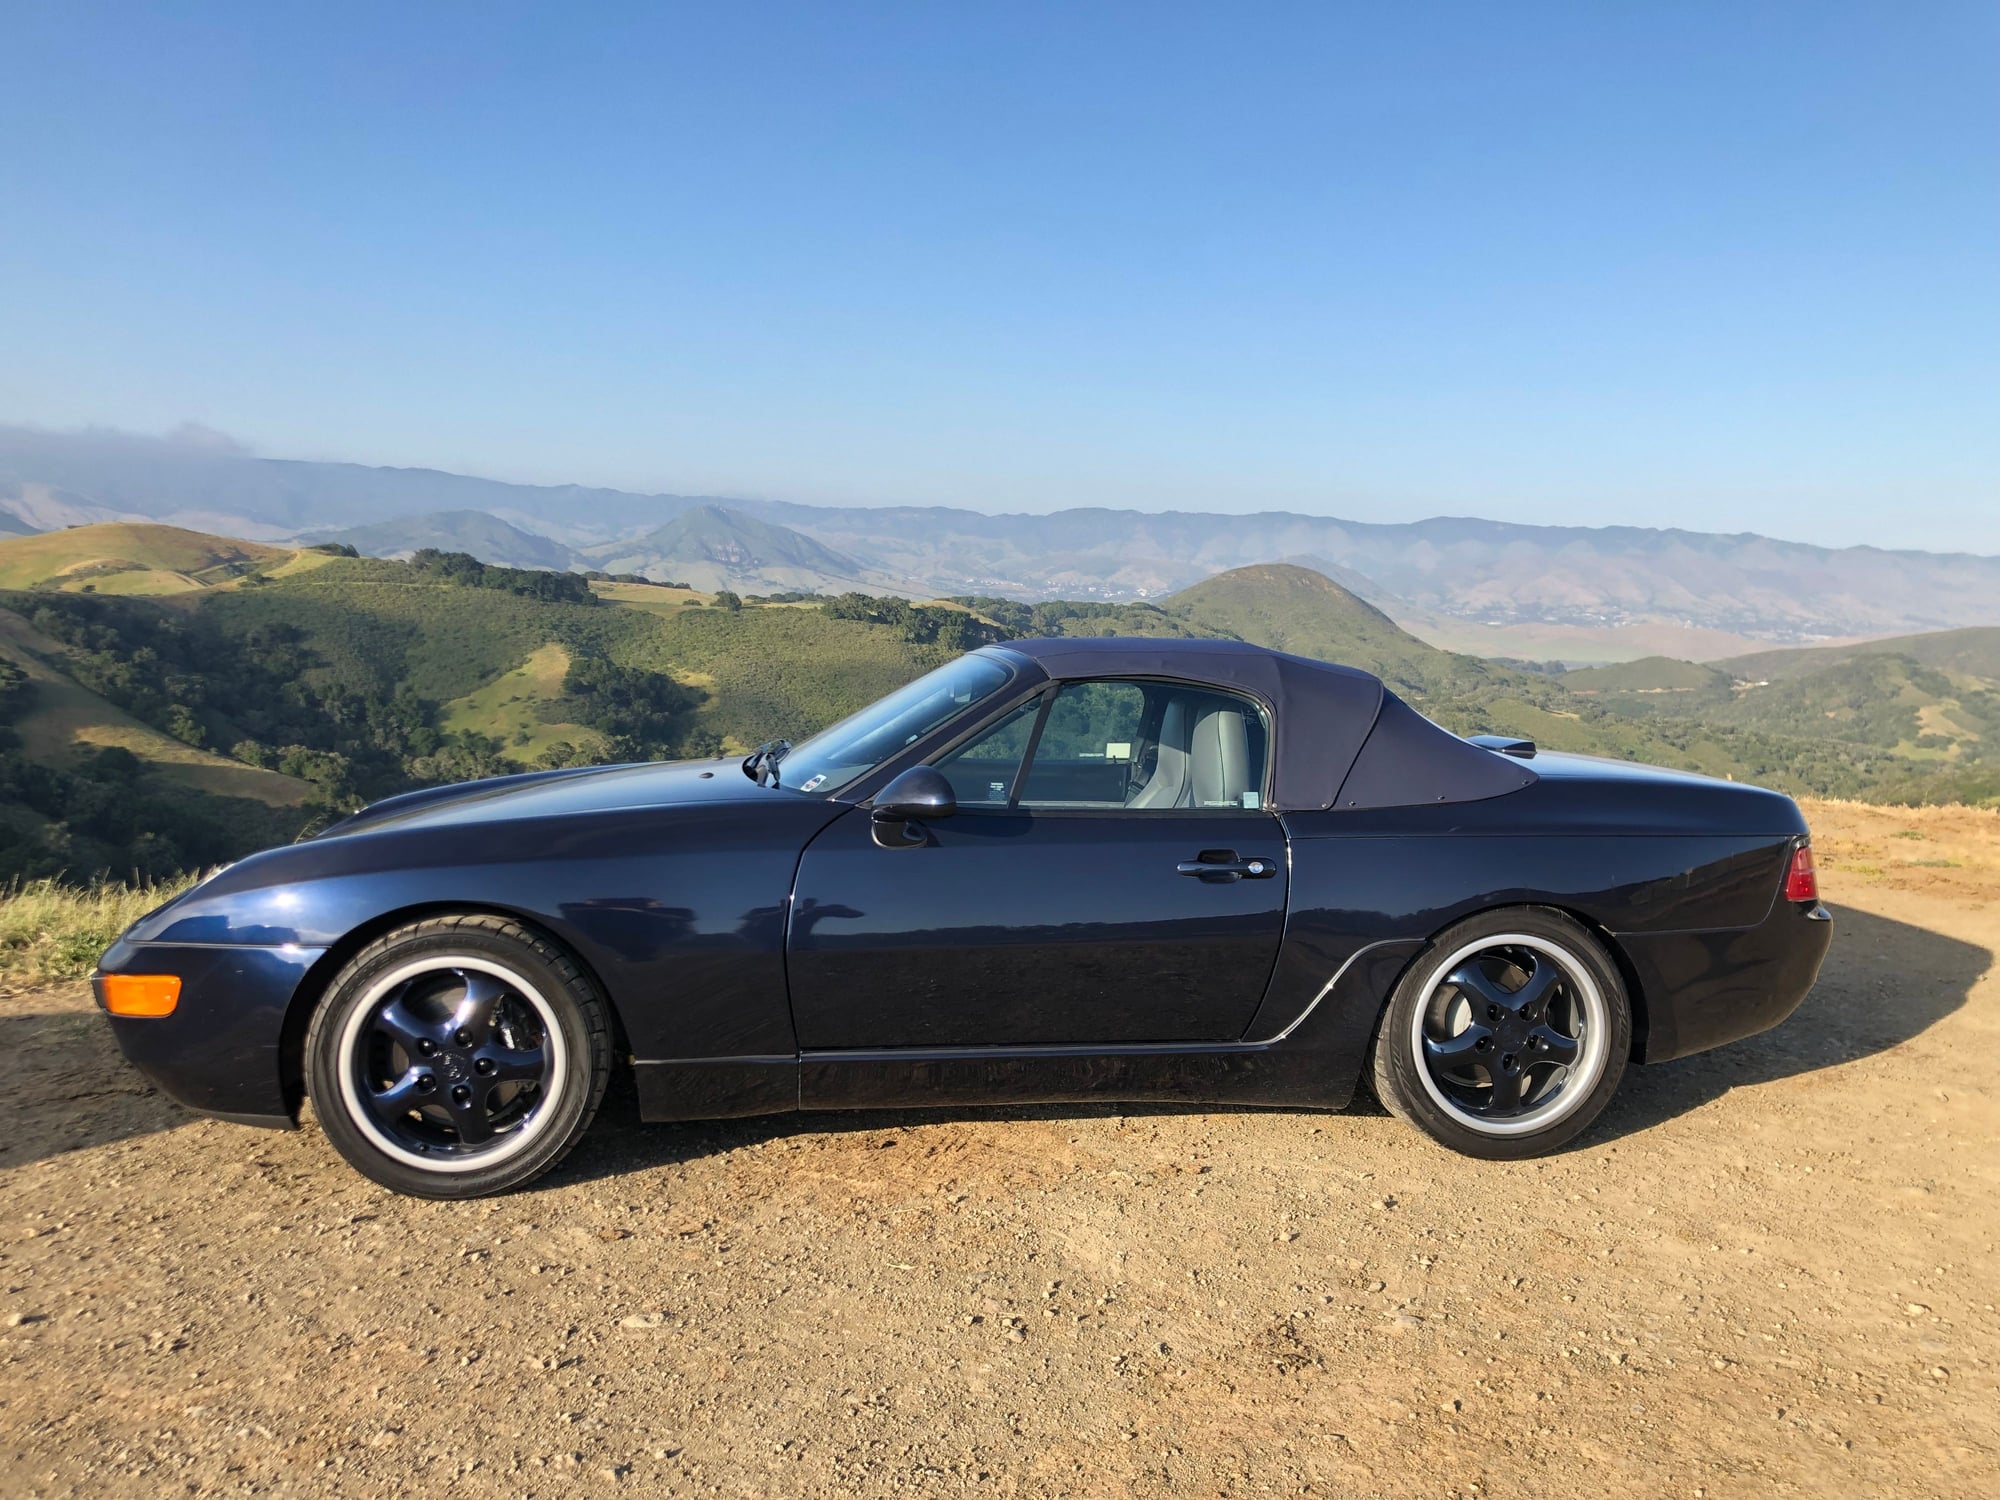 1992 Porsche 968 - 1992 Porsche 968 Cabriolet - Used - VIN WP0CA2962NS840371 - 98,400 Miles - 4 cyl - 2WD - Manual - Convertible - Blue - Pismo Beach, CA 93449, United States